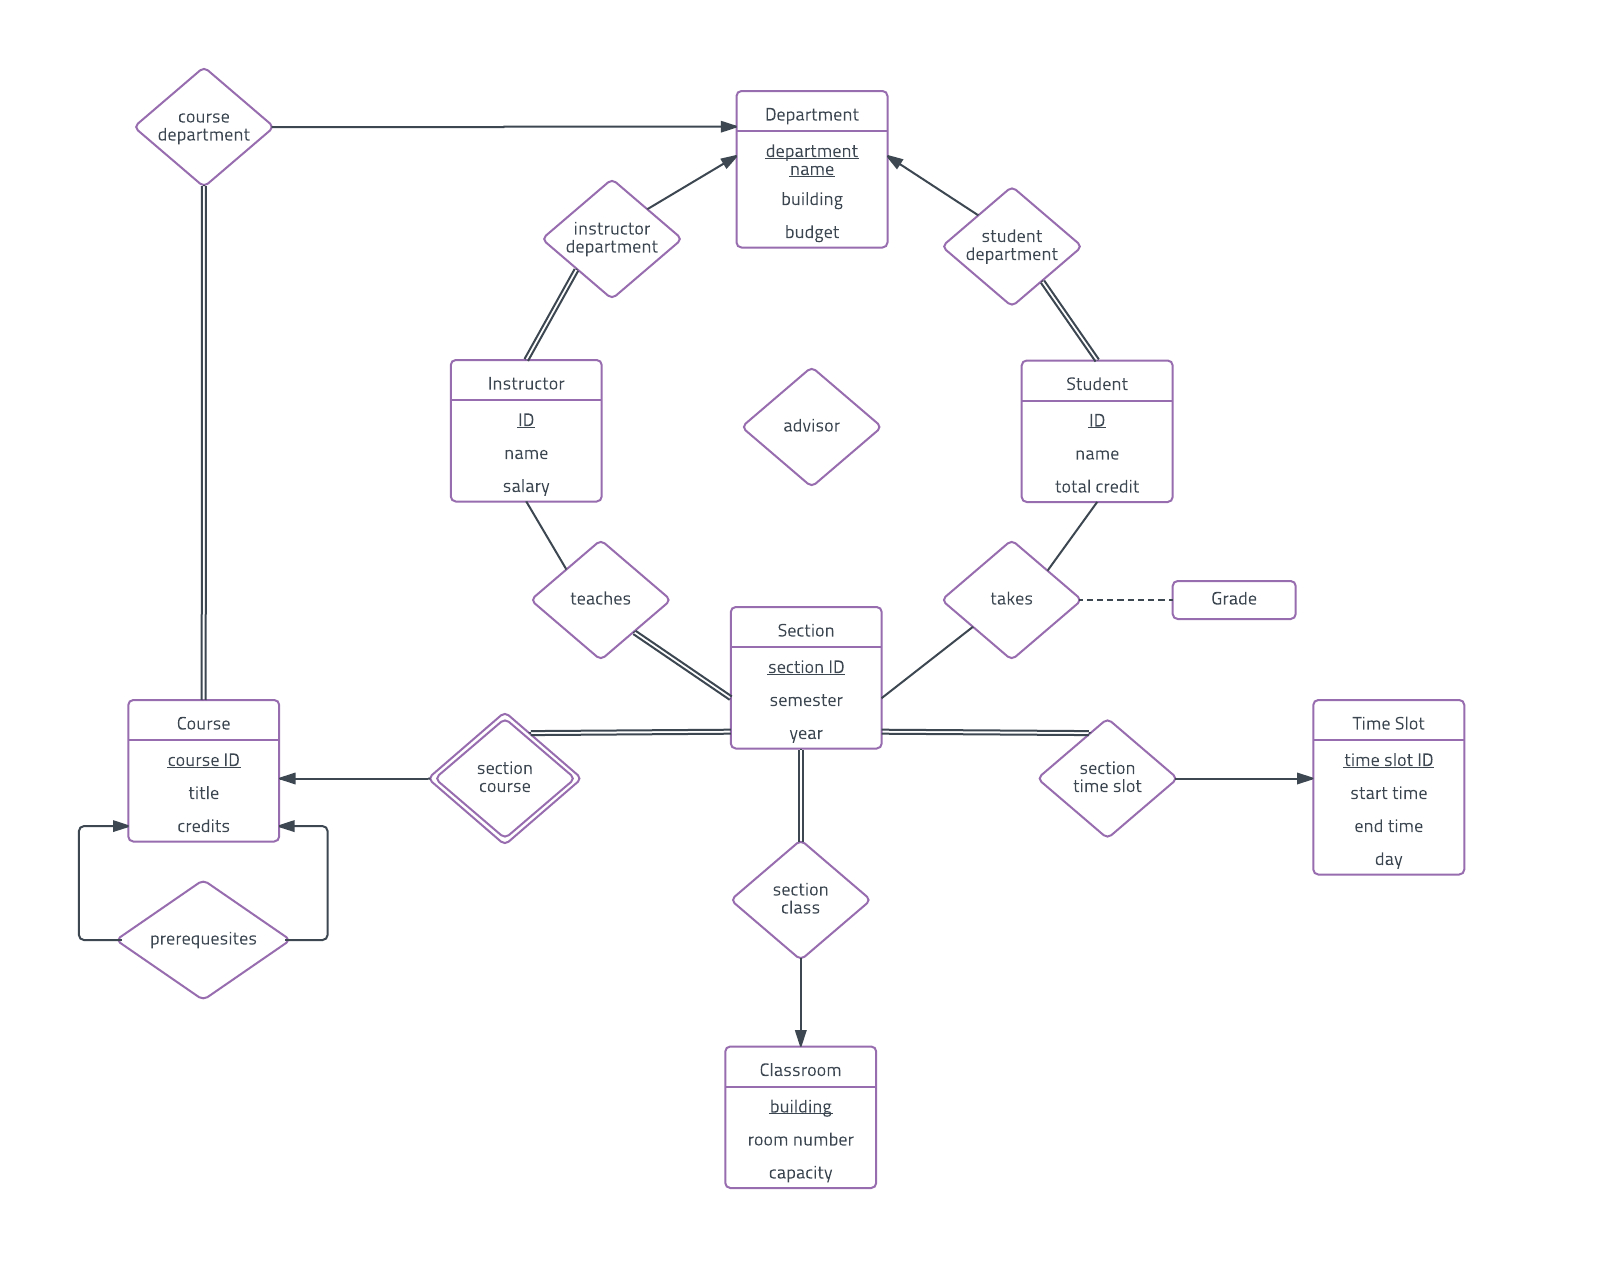 Er Diagram Examples And Templates | Lucidchart with regard to Er Schema Diagram For The Company Database